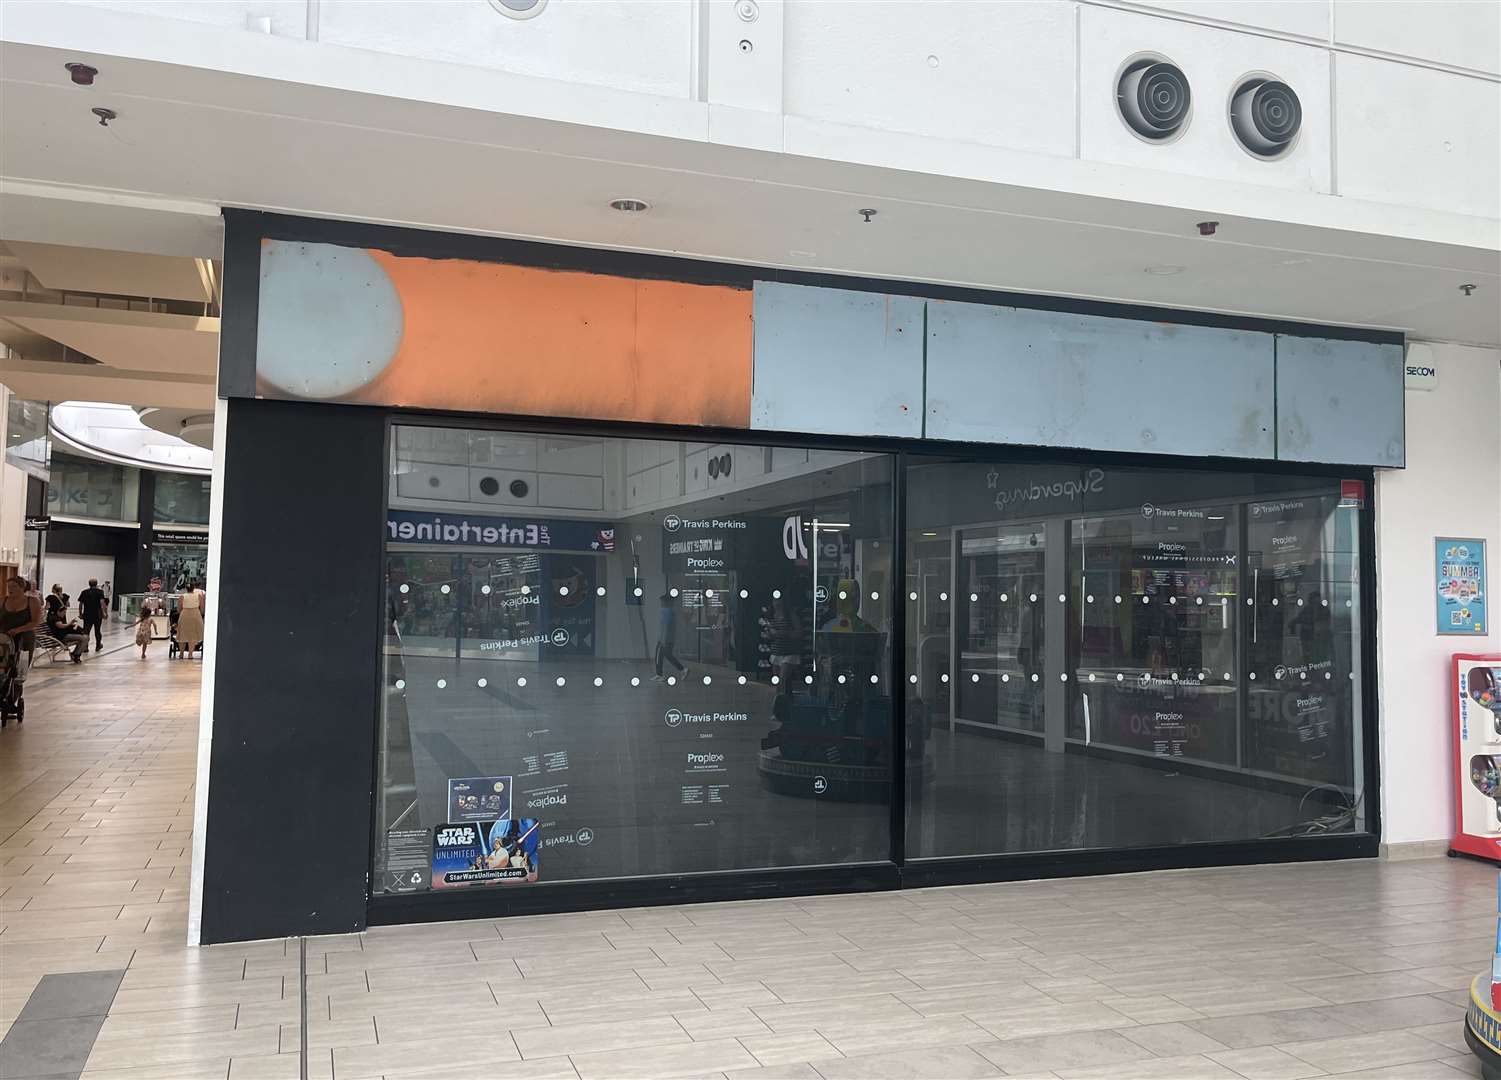 The Waterstones unit in County Square closed its doors on June 2; it will now be filled by Specsavers